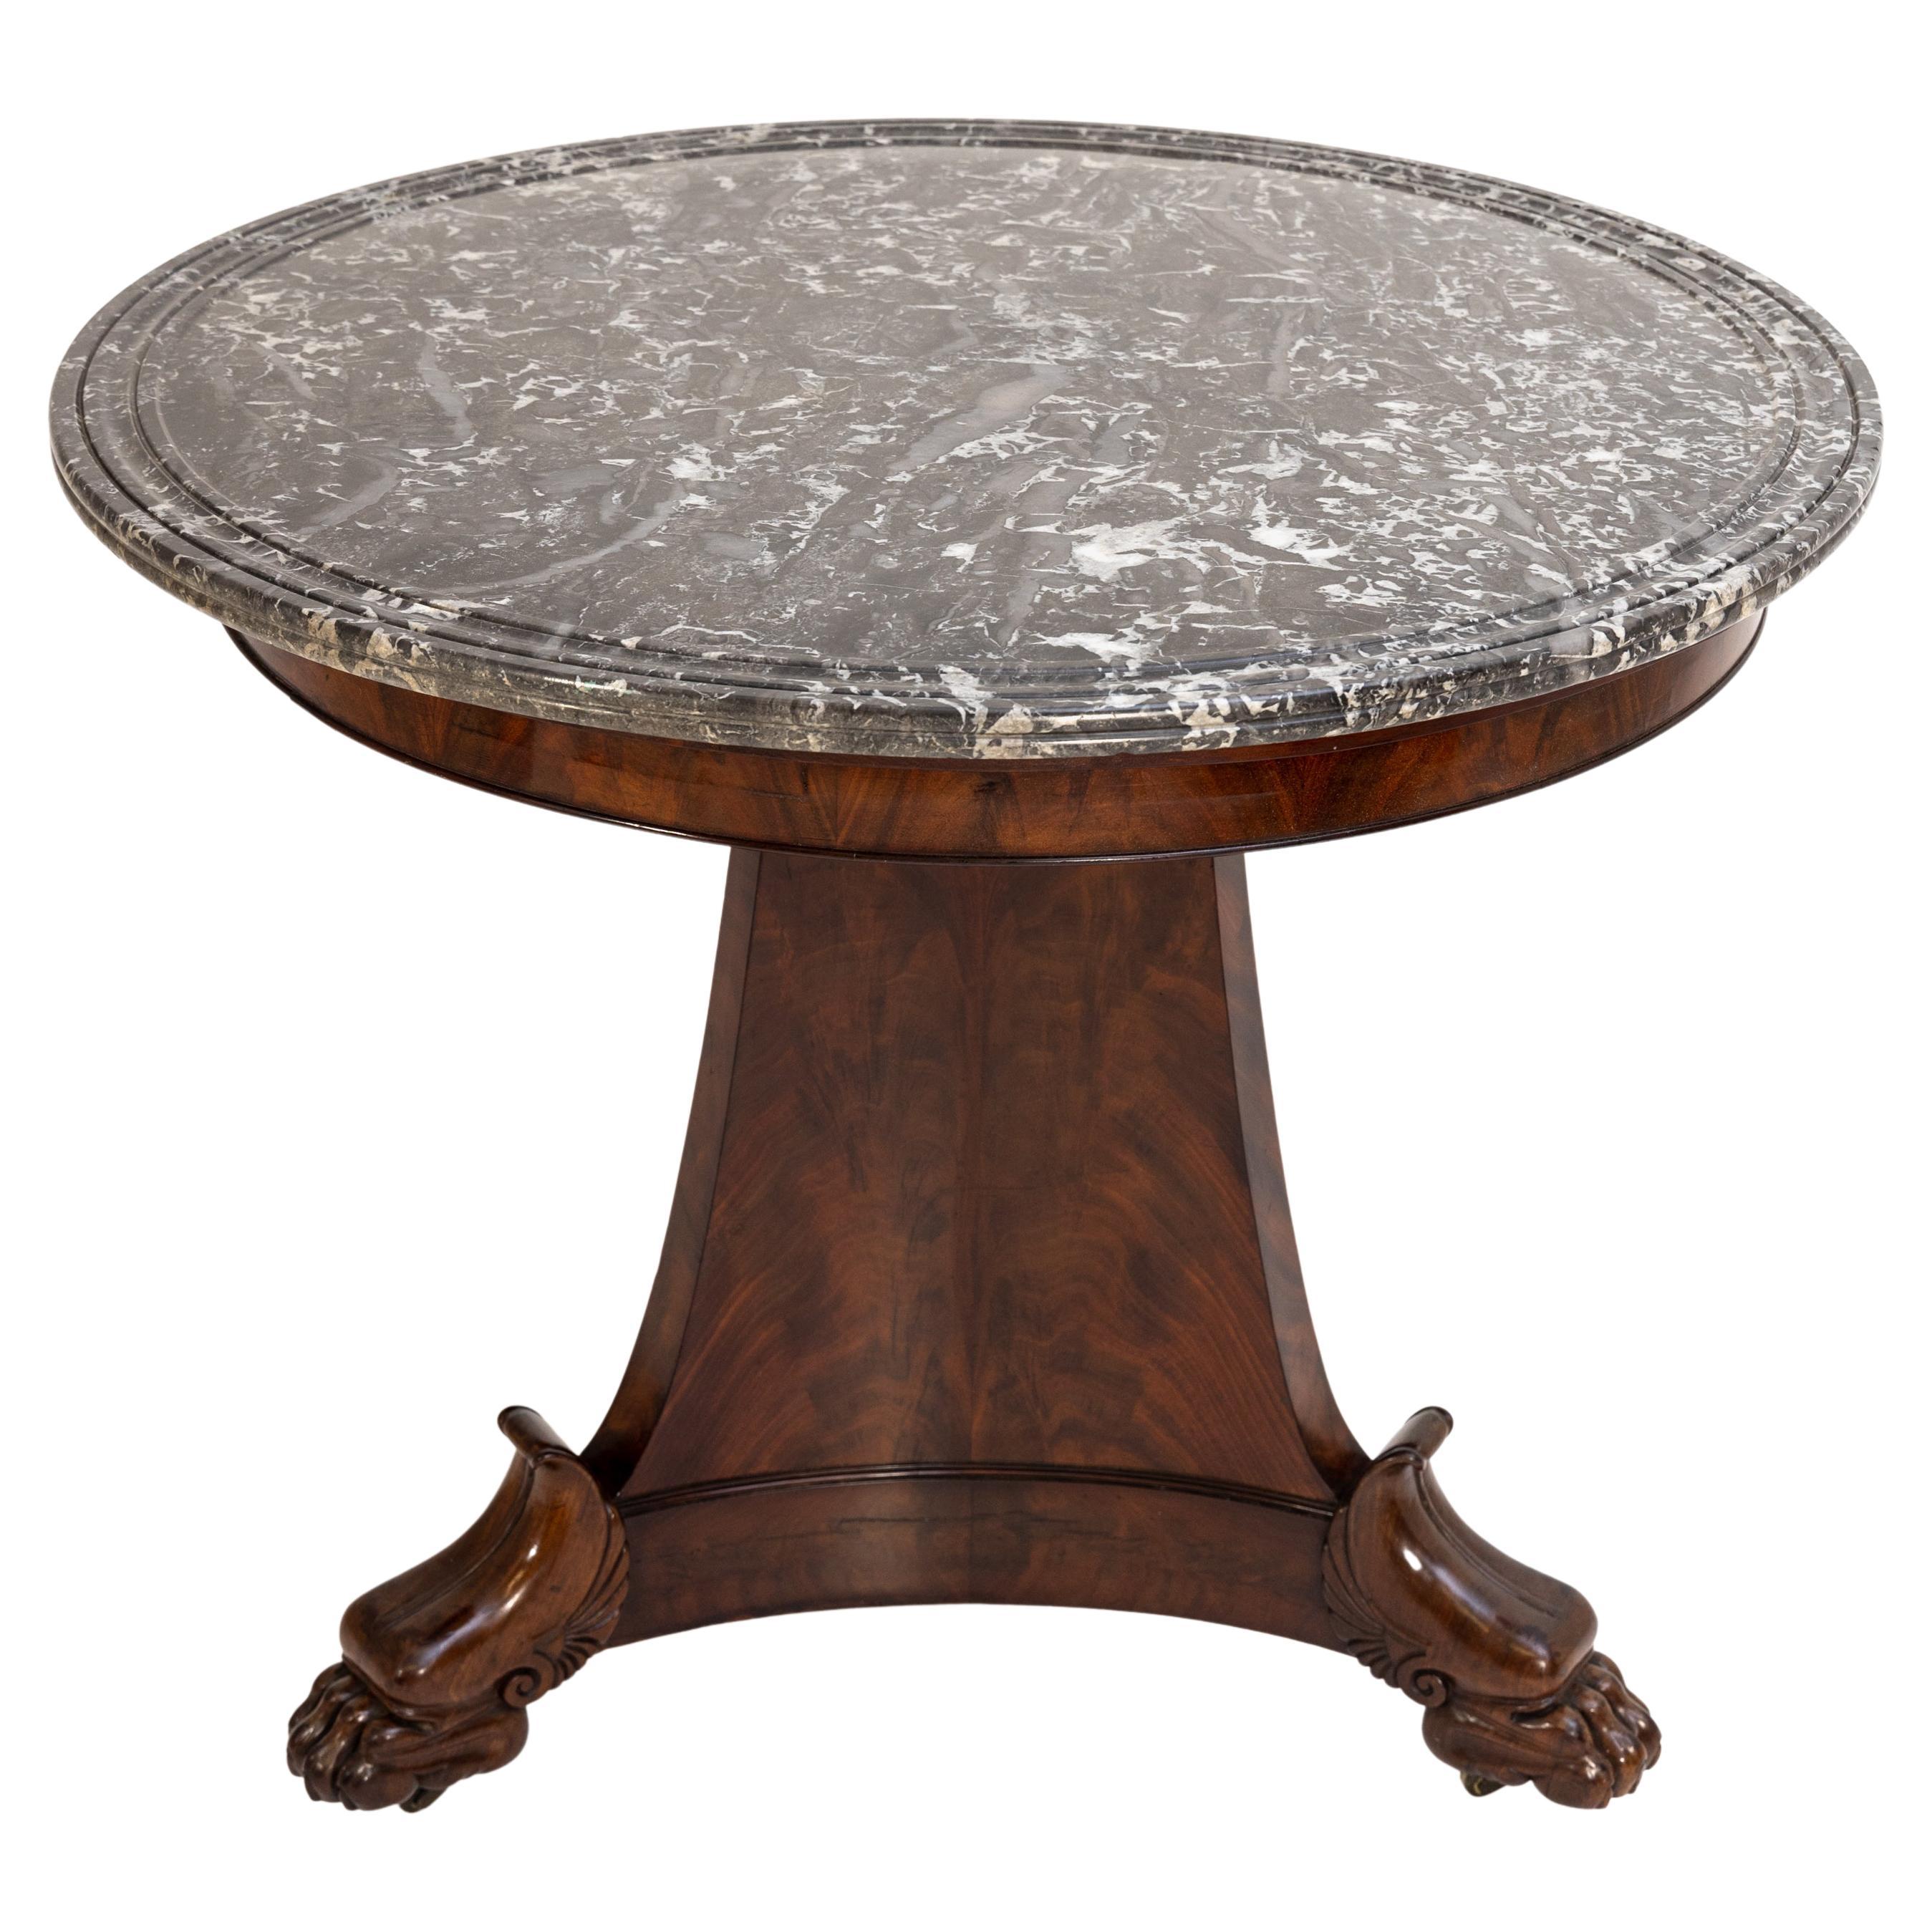 Three-legged gueridon with gray marble top and paw feet. The table stands on brass casters and is veneered in mahogany.